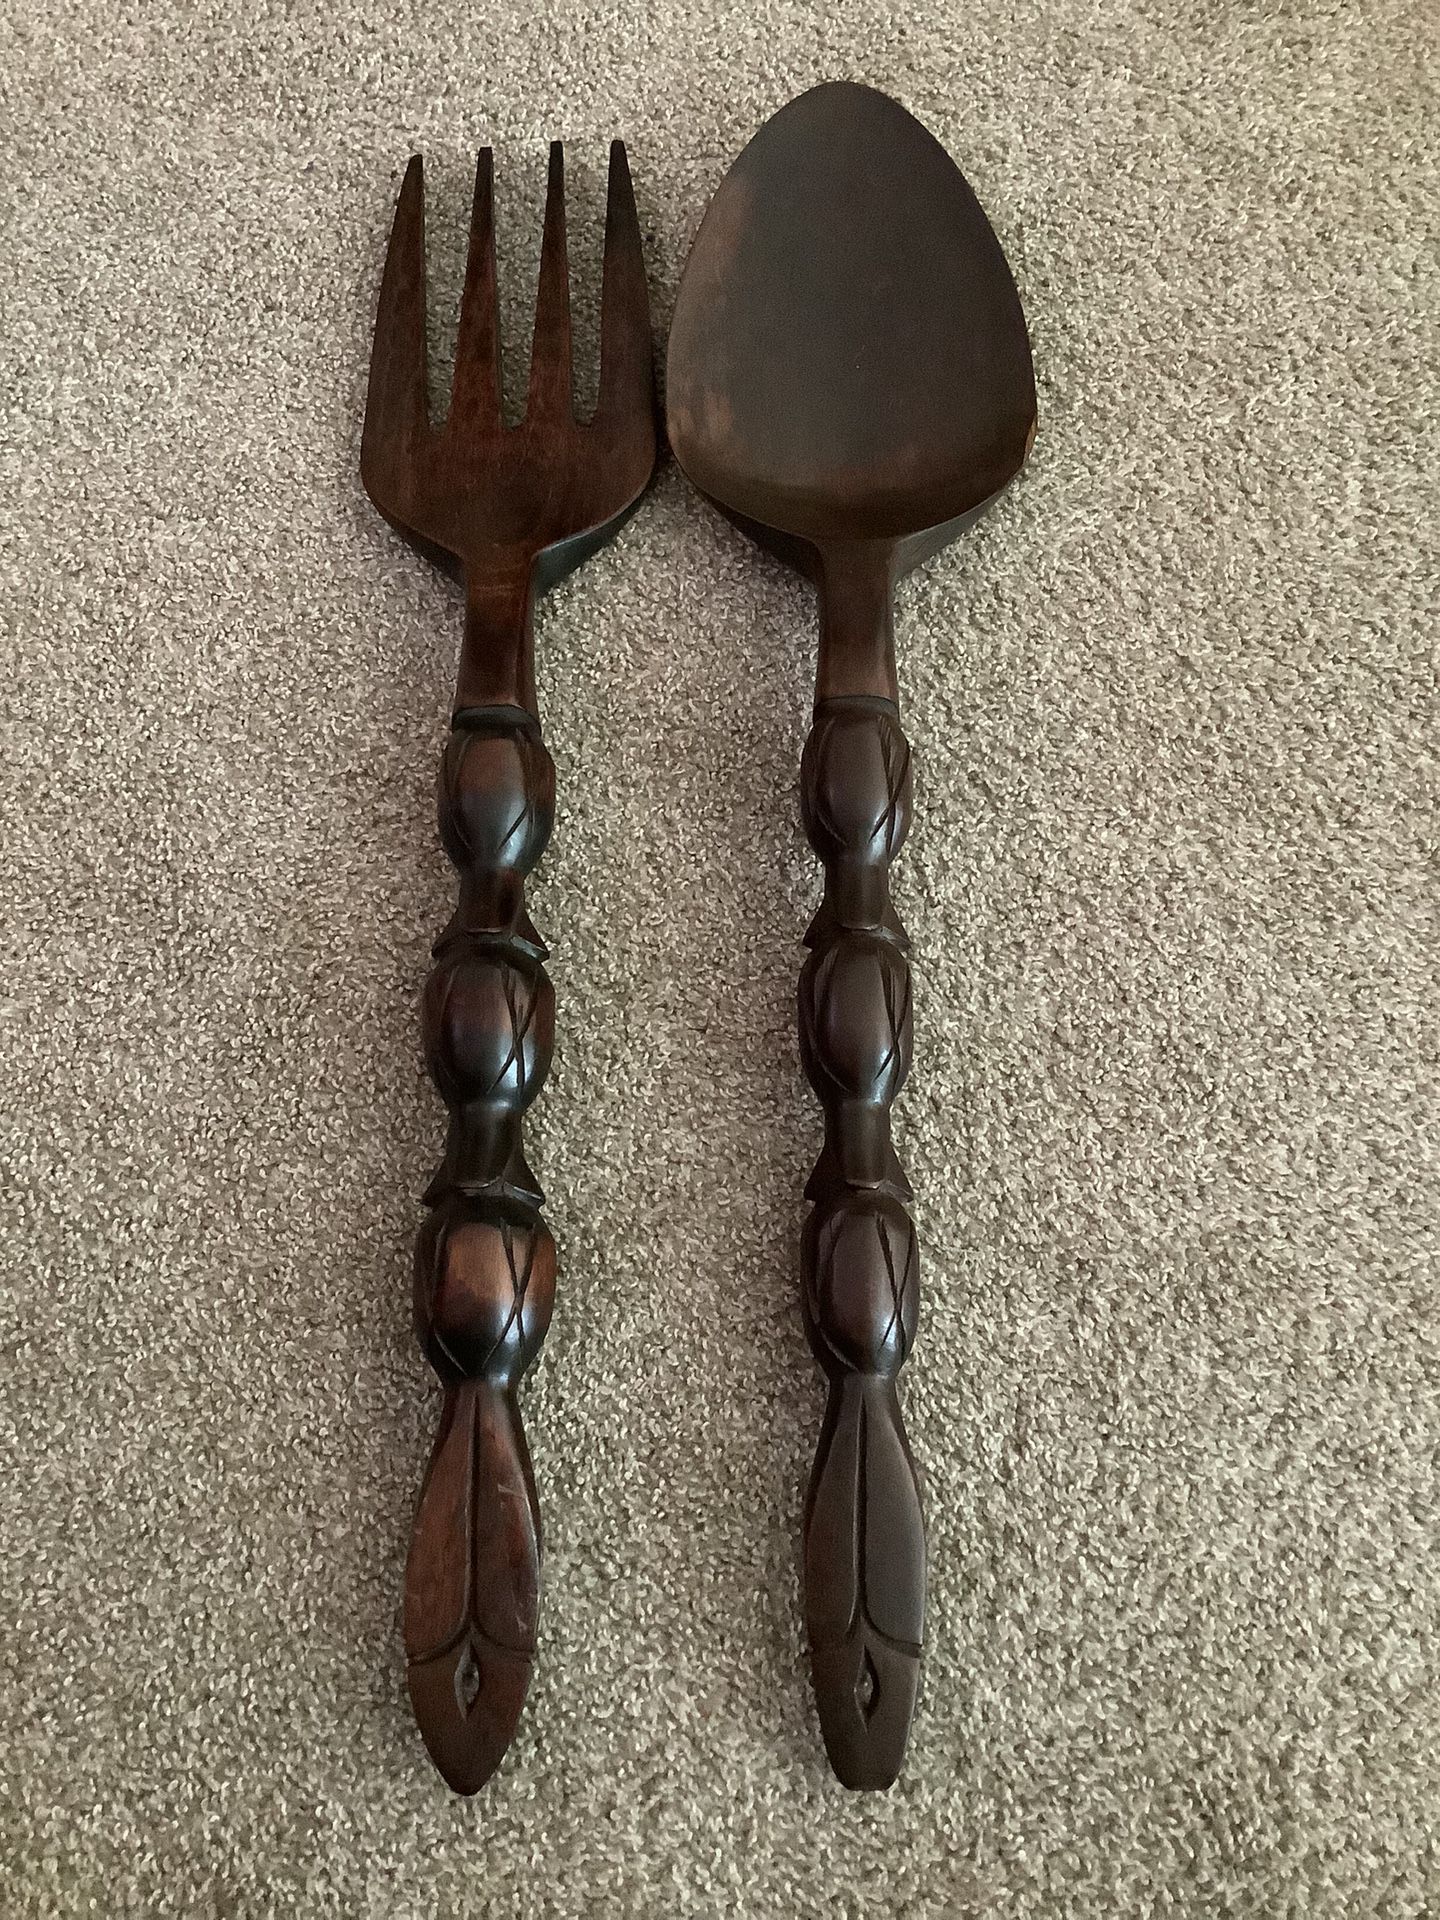 Vintage Carved Wooden 27” Large Decorative Spoon And Fork Wall, Kitchen Decor Made In Philippines